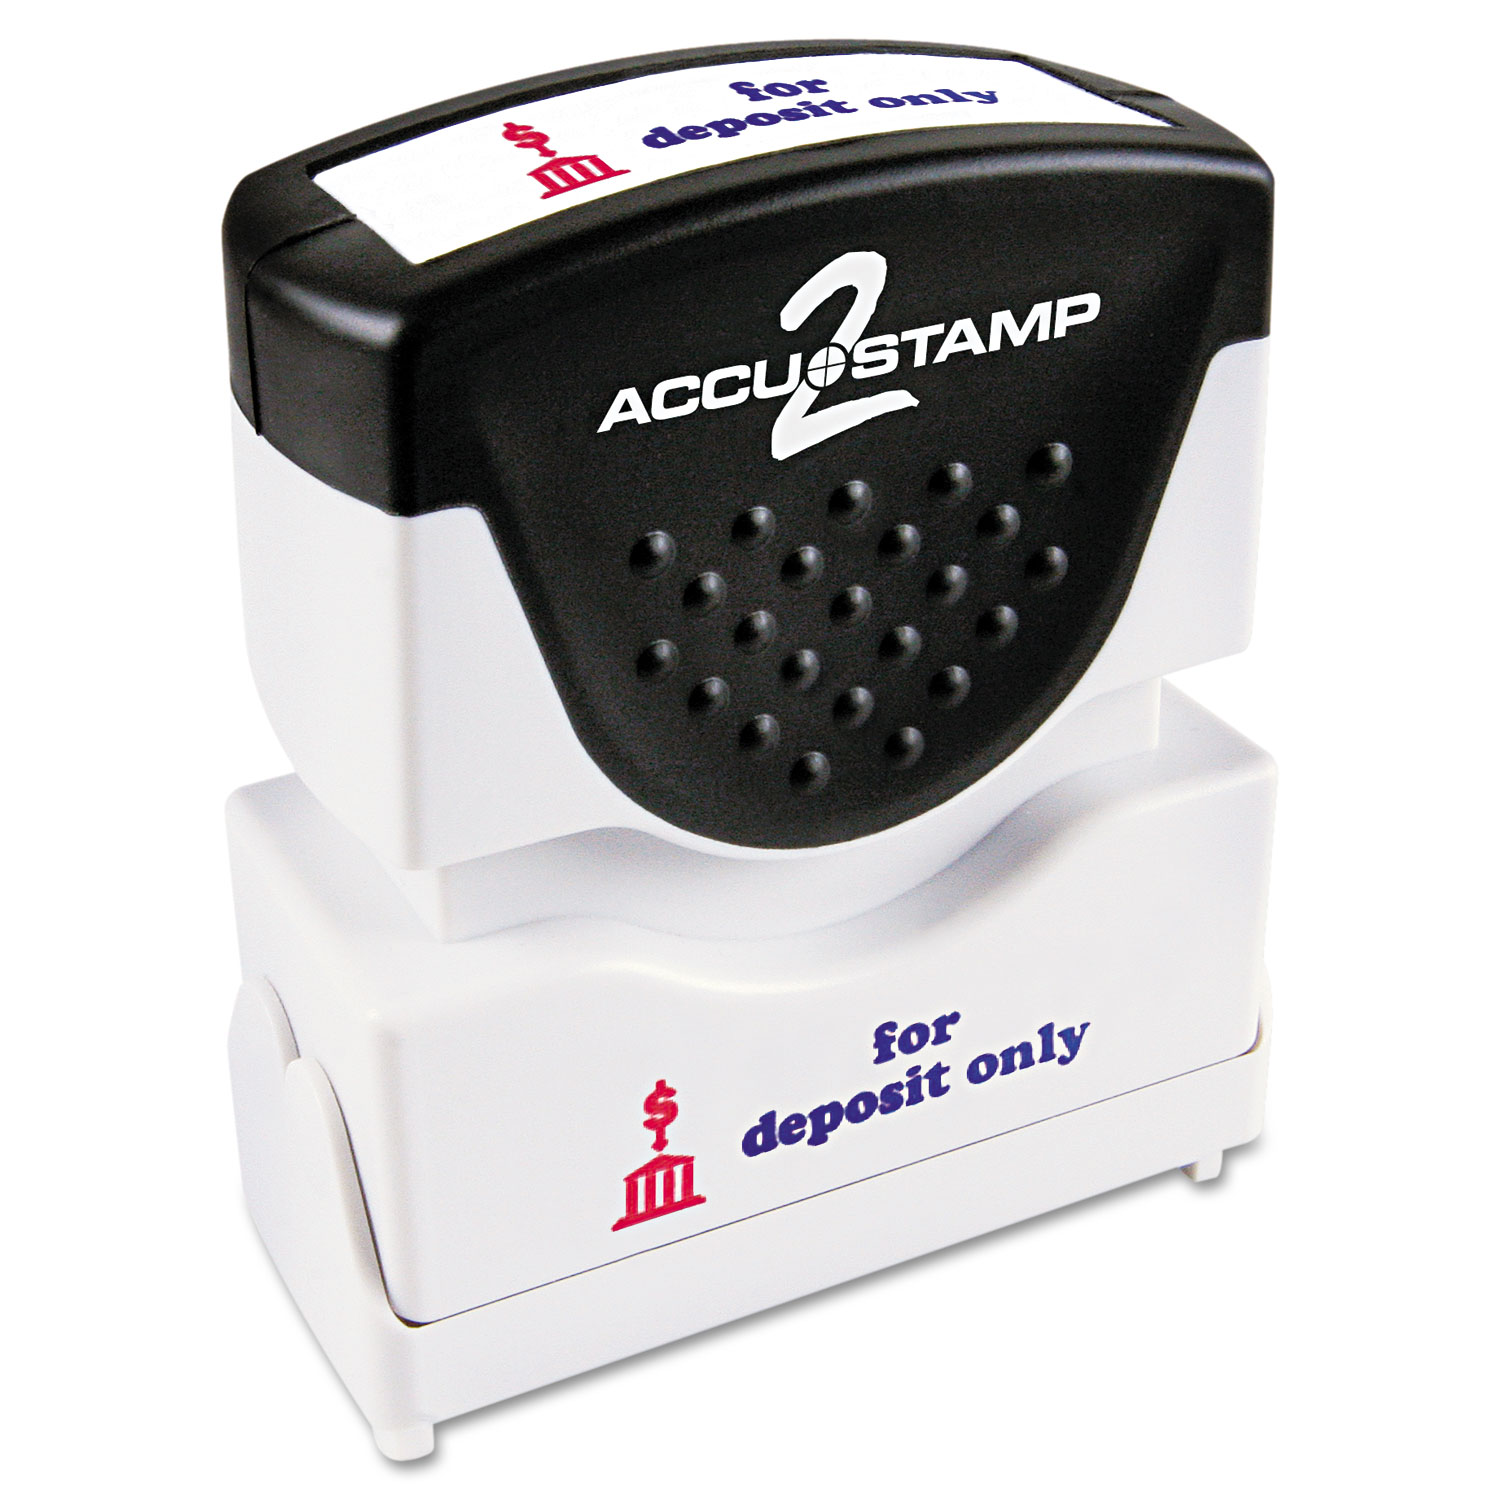  ACCUSTAMP2 035523 Pre-Inked Shutter Stamp, Red/Blue, FOR DEPOSIT ONLY, 1 5/8 x 1/2 (COS035523) 